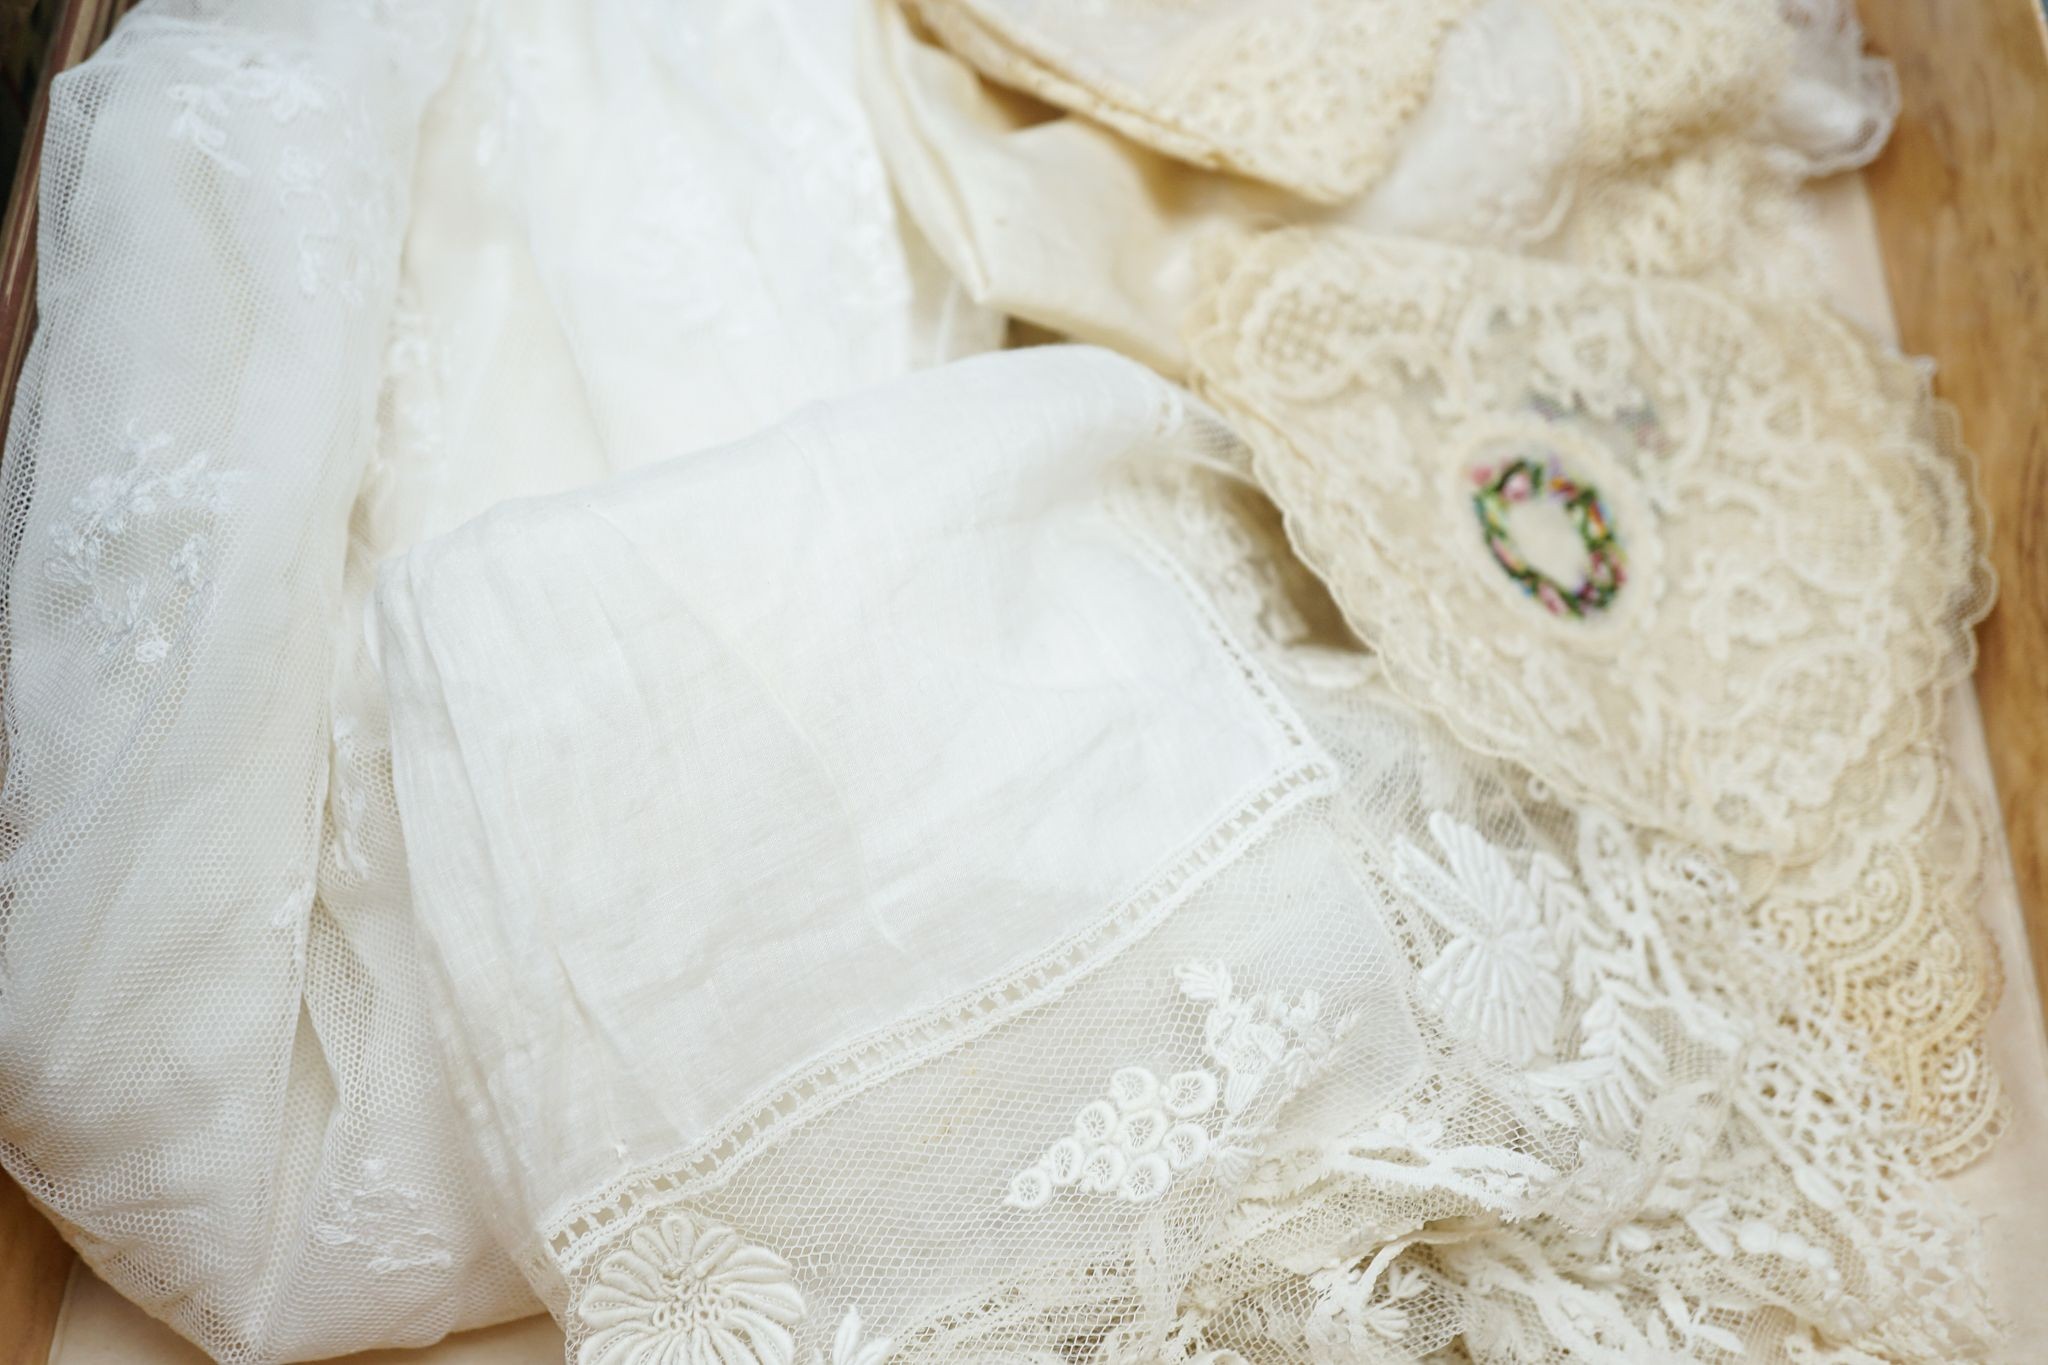 Two early 19th century, finely white worked lace hankies, various sets of lace mats and a lace - Image 3 of 5